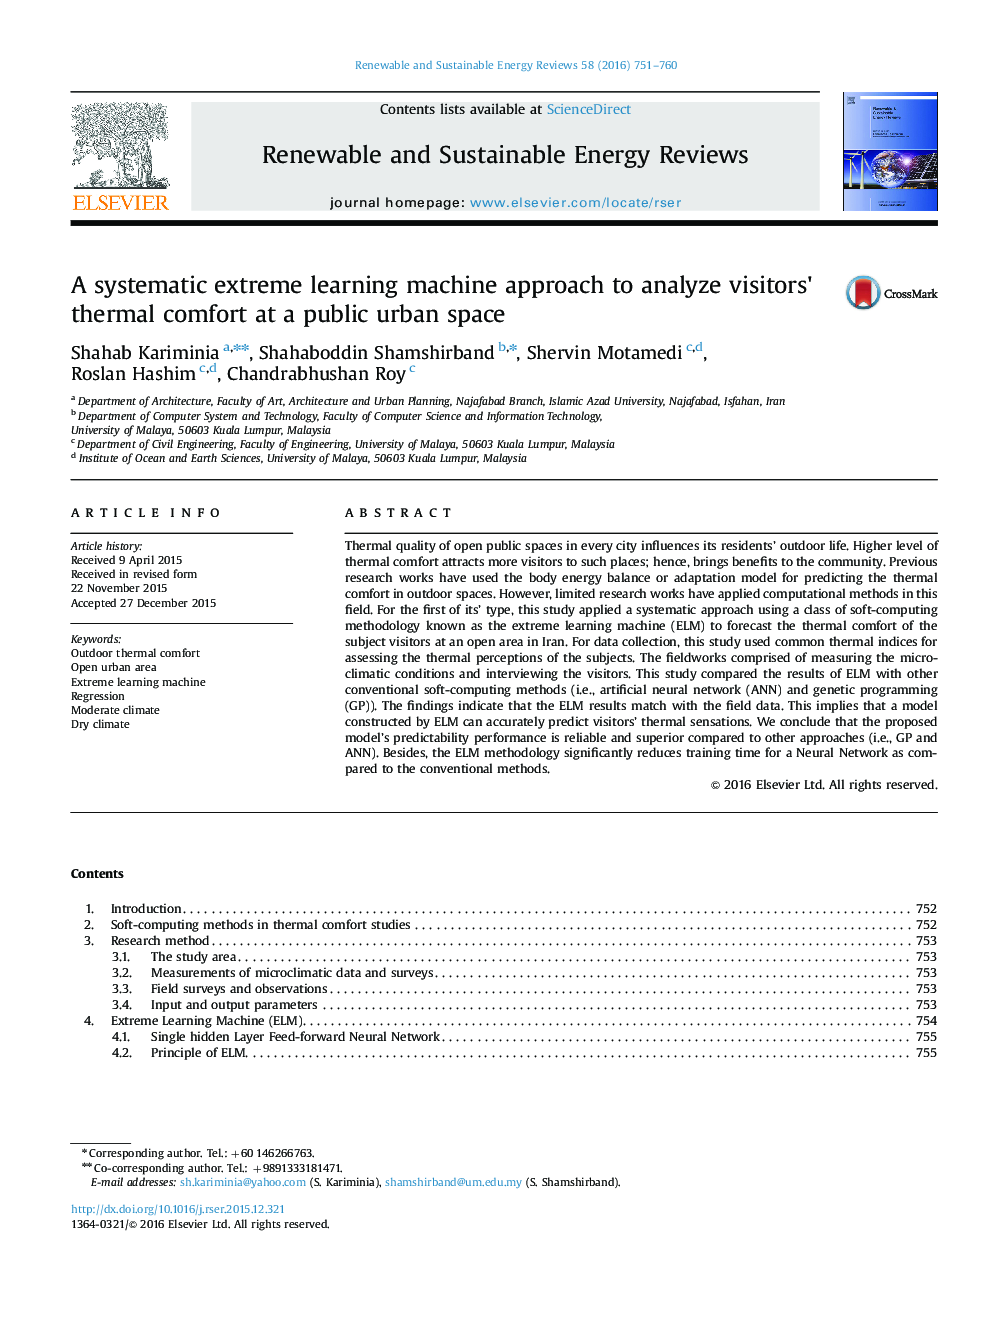 A systematic extreme learning machine approach to analyze visitors×³ thermal comfort at a public urban space